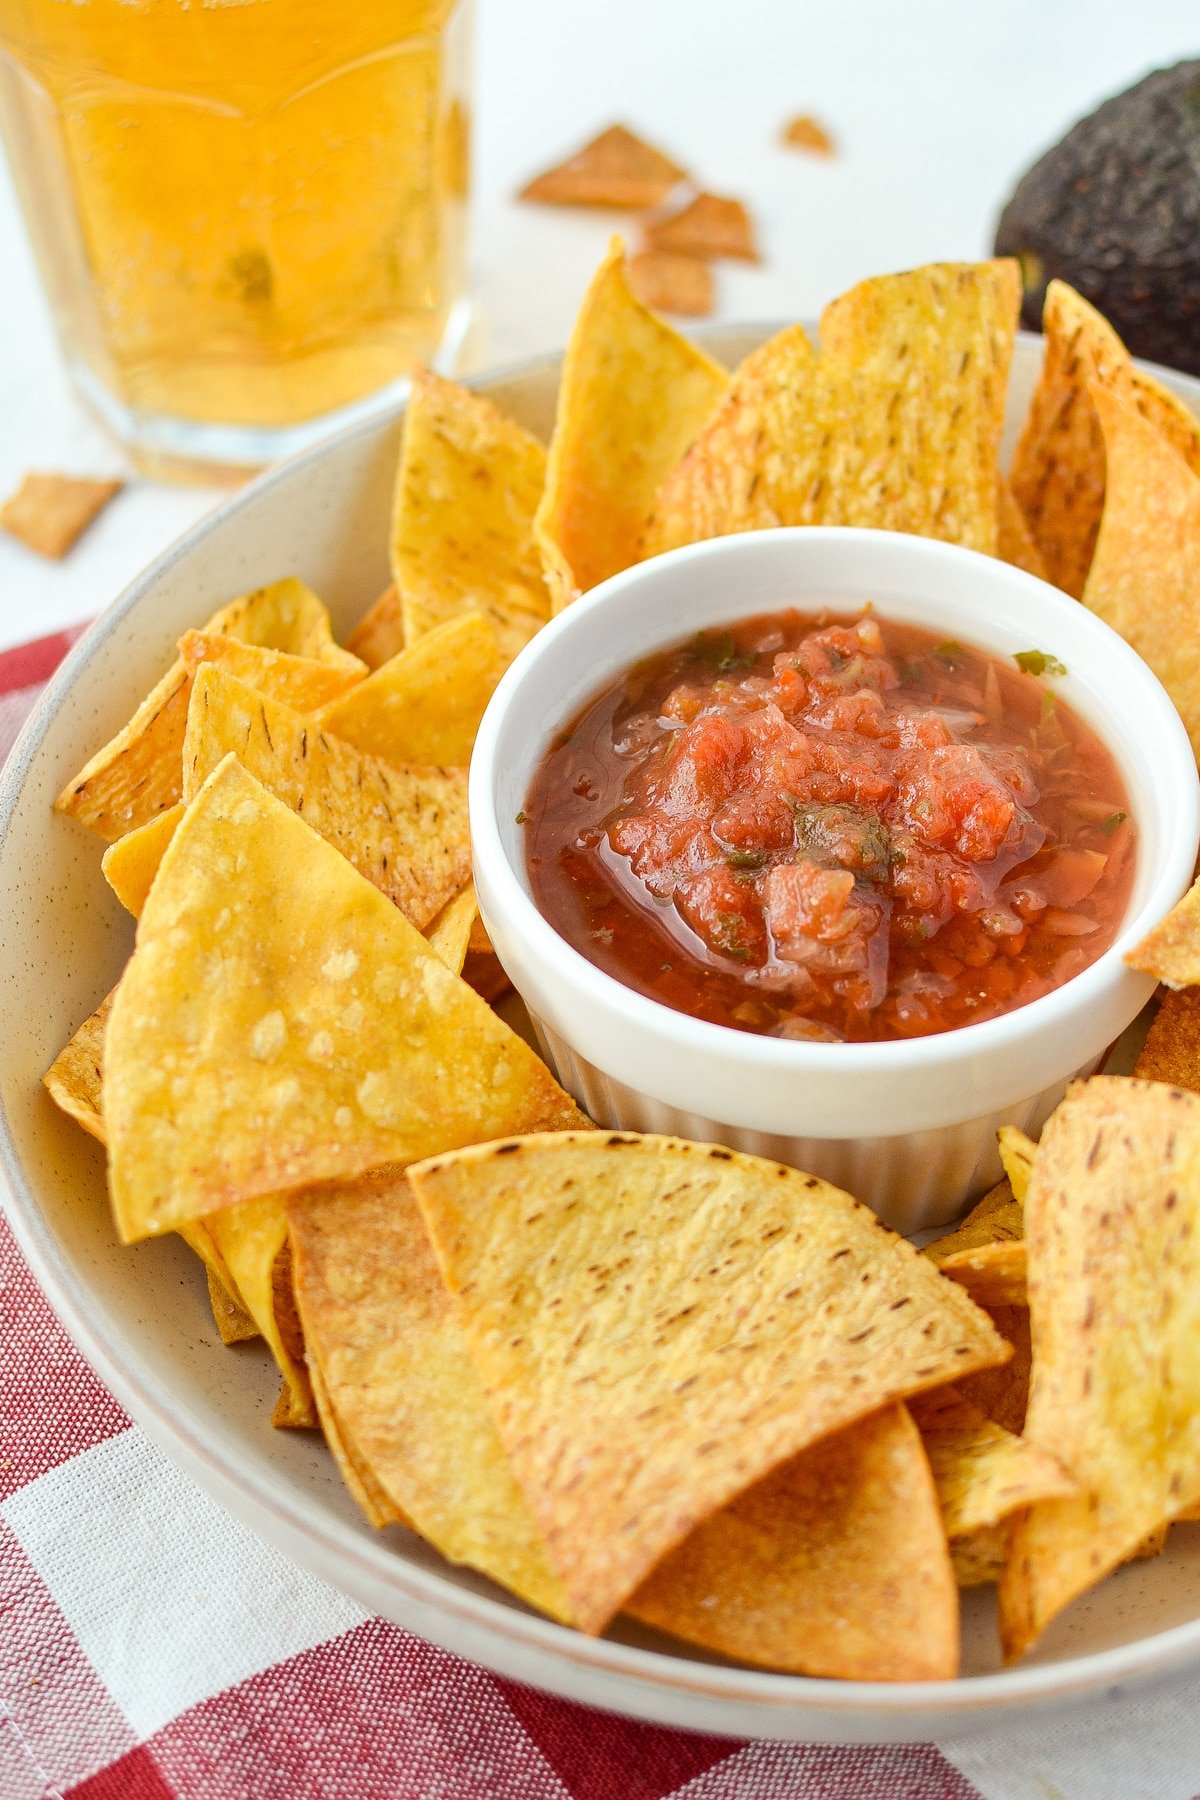 A bowl of tortilla chips with salsa in the middle.